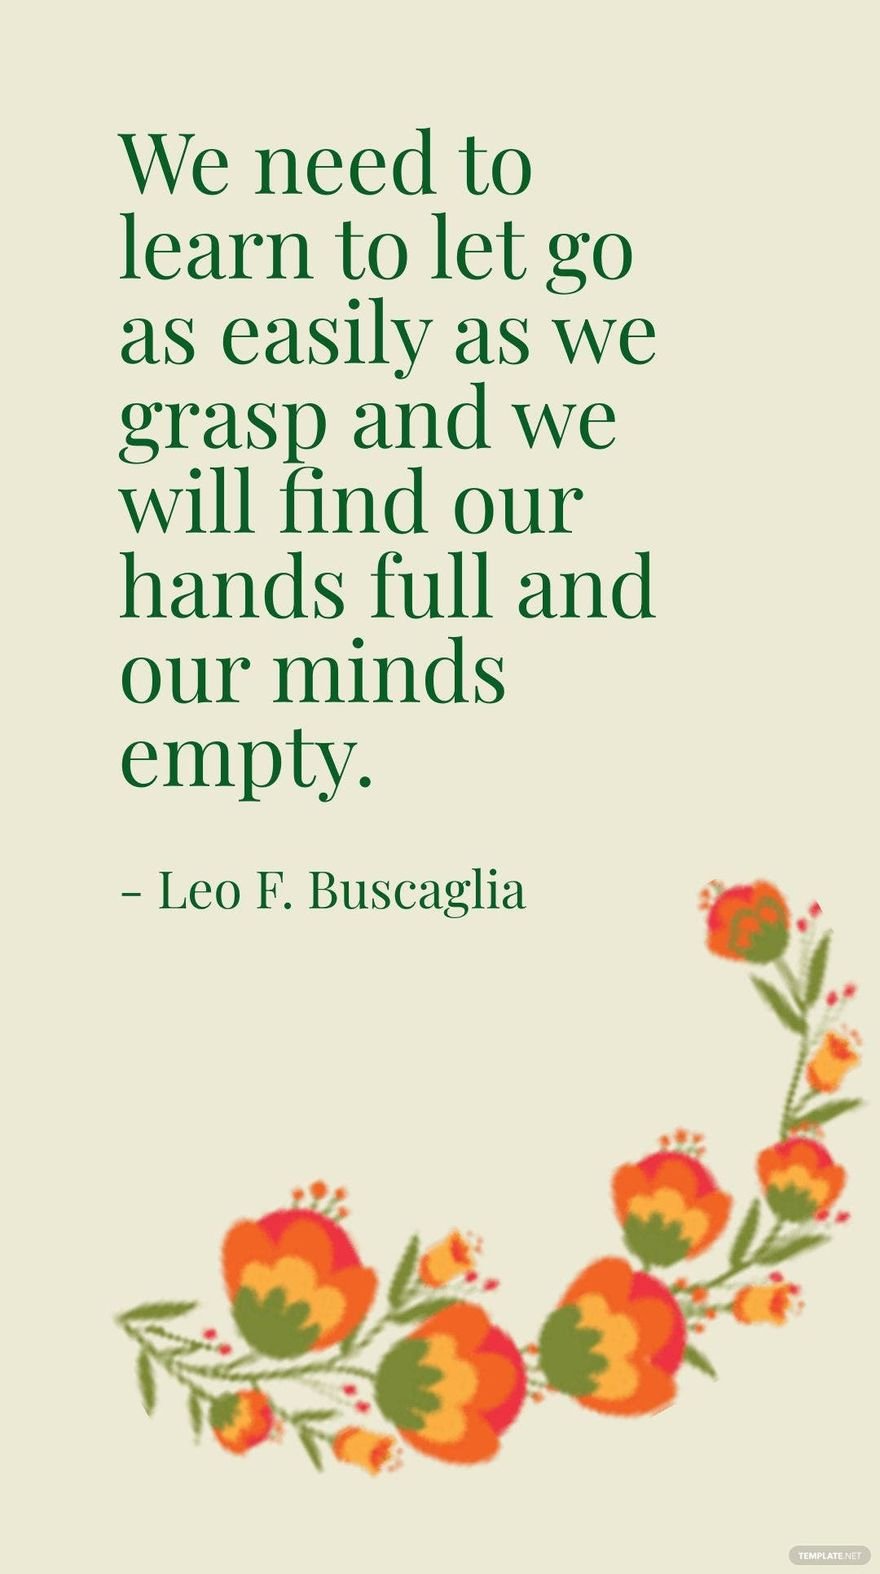 Leo F. Buscaglia - We need to learn to let go as easily as we grasp and we will find our hands full and our minds empty.